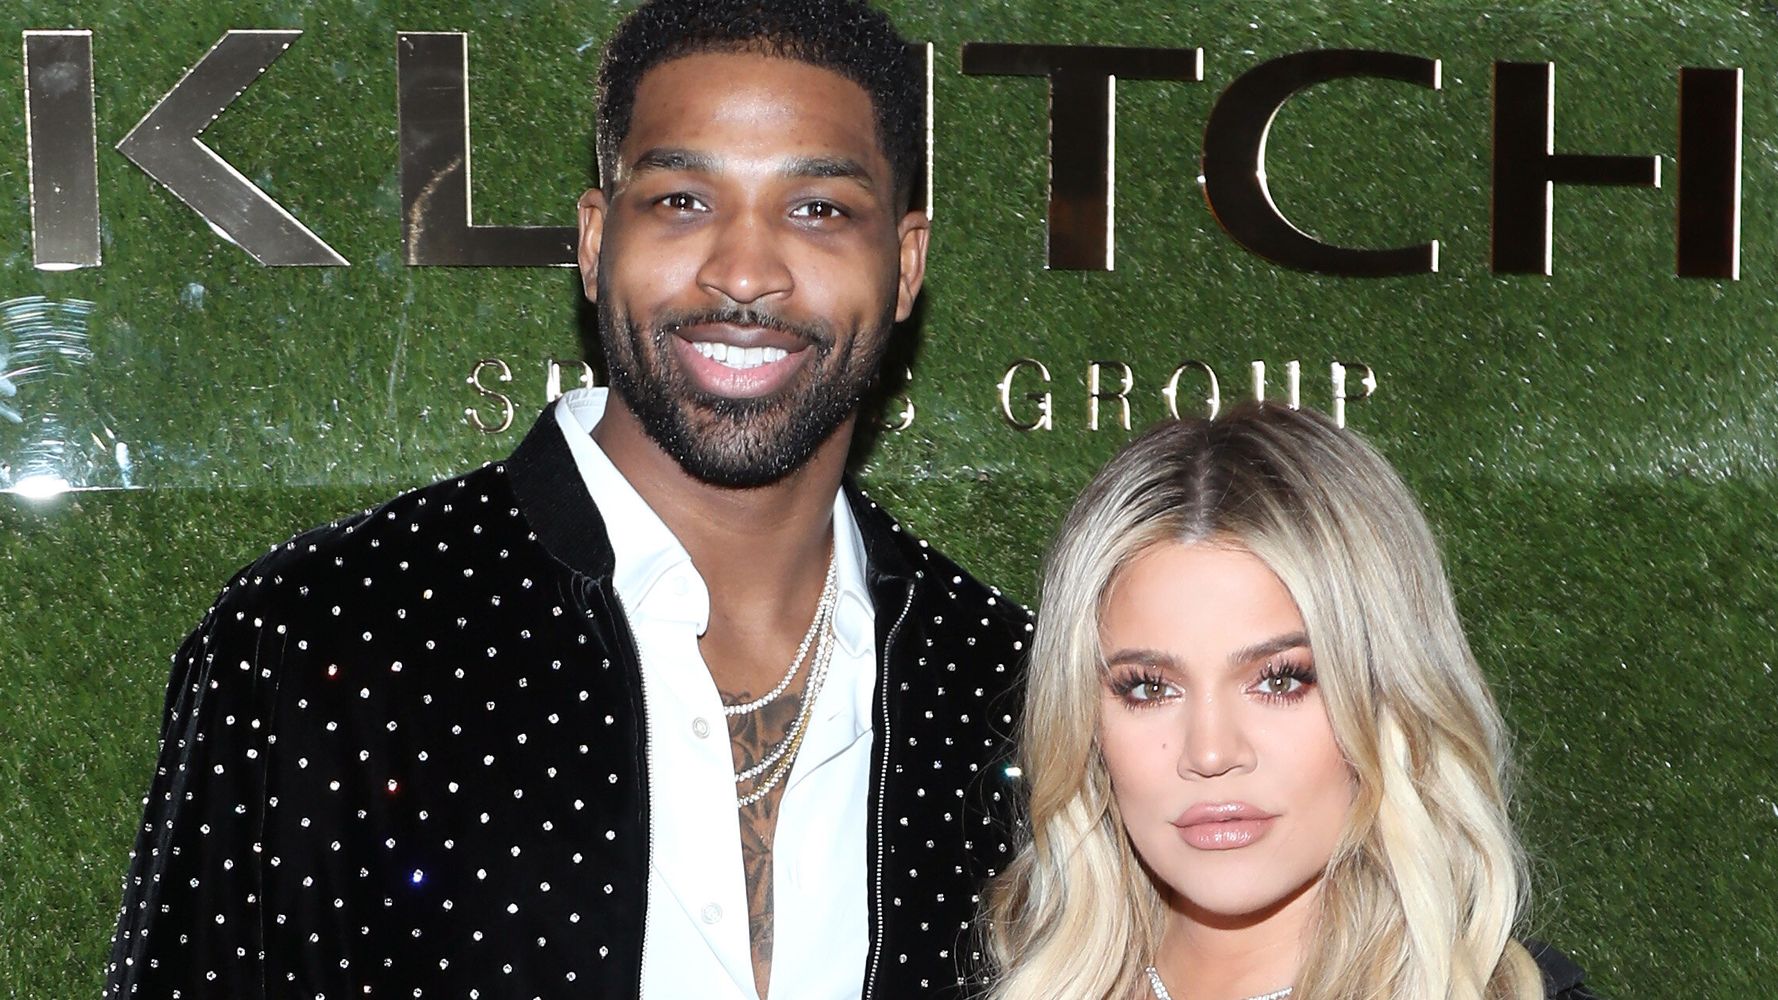 Khloé Kardashian Welcomes Her 2nd Child With Tristan Thompson